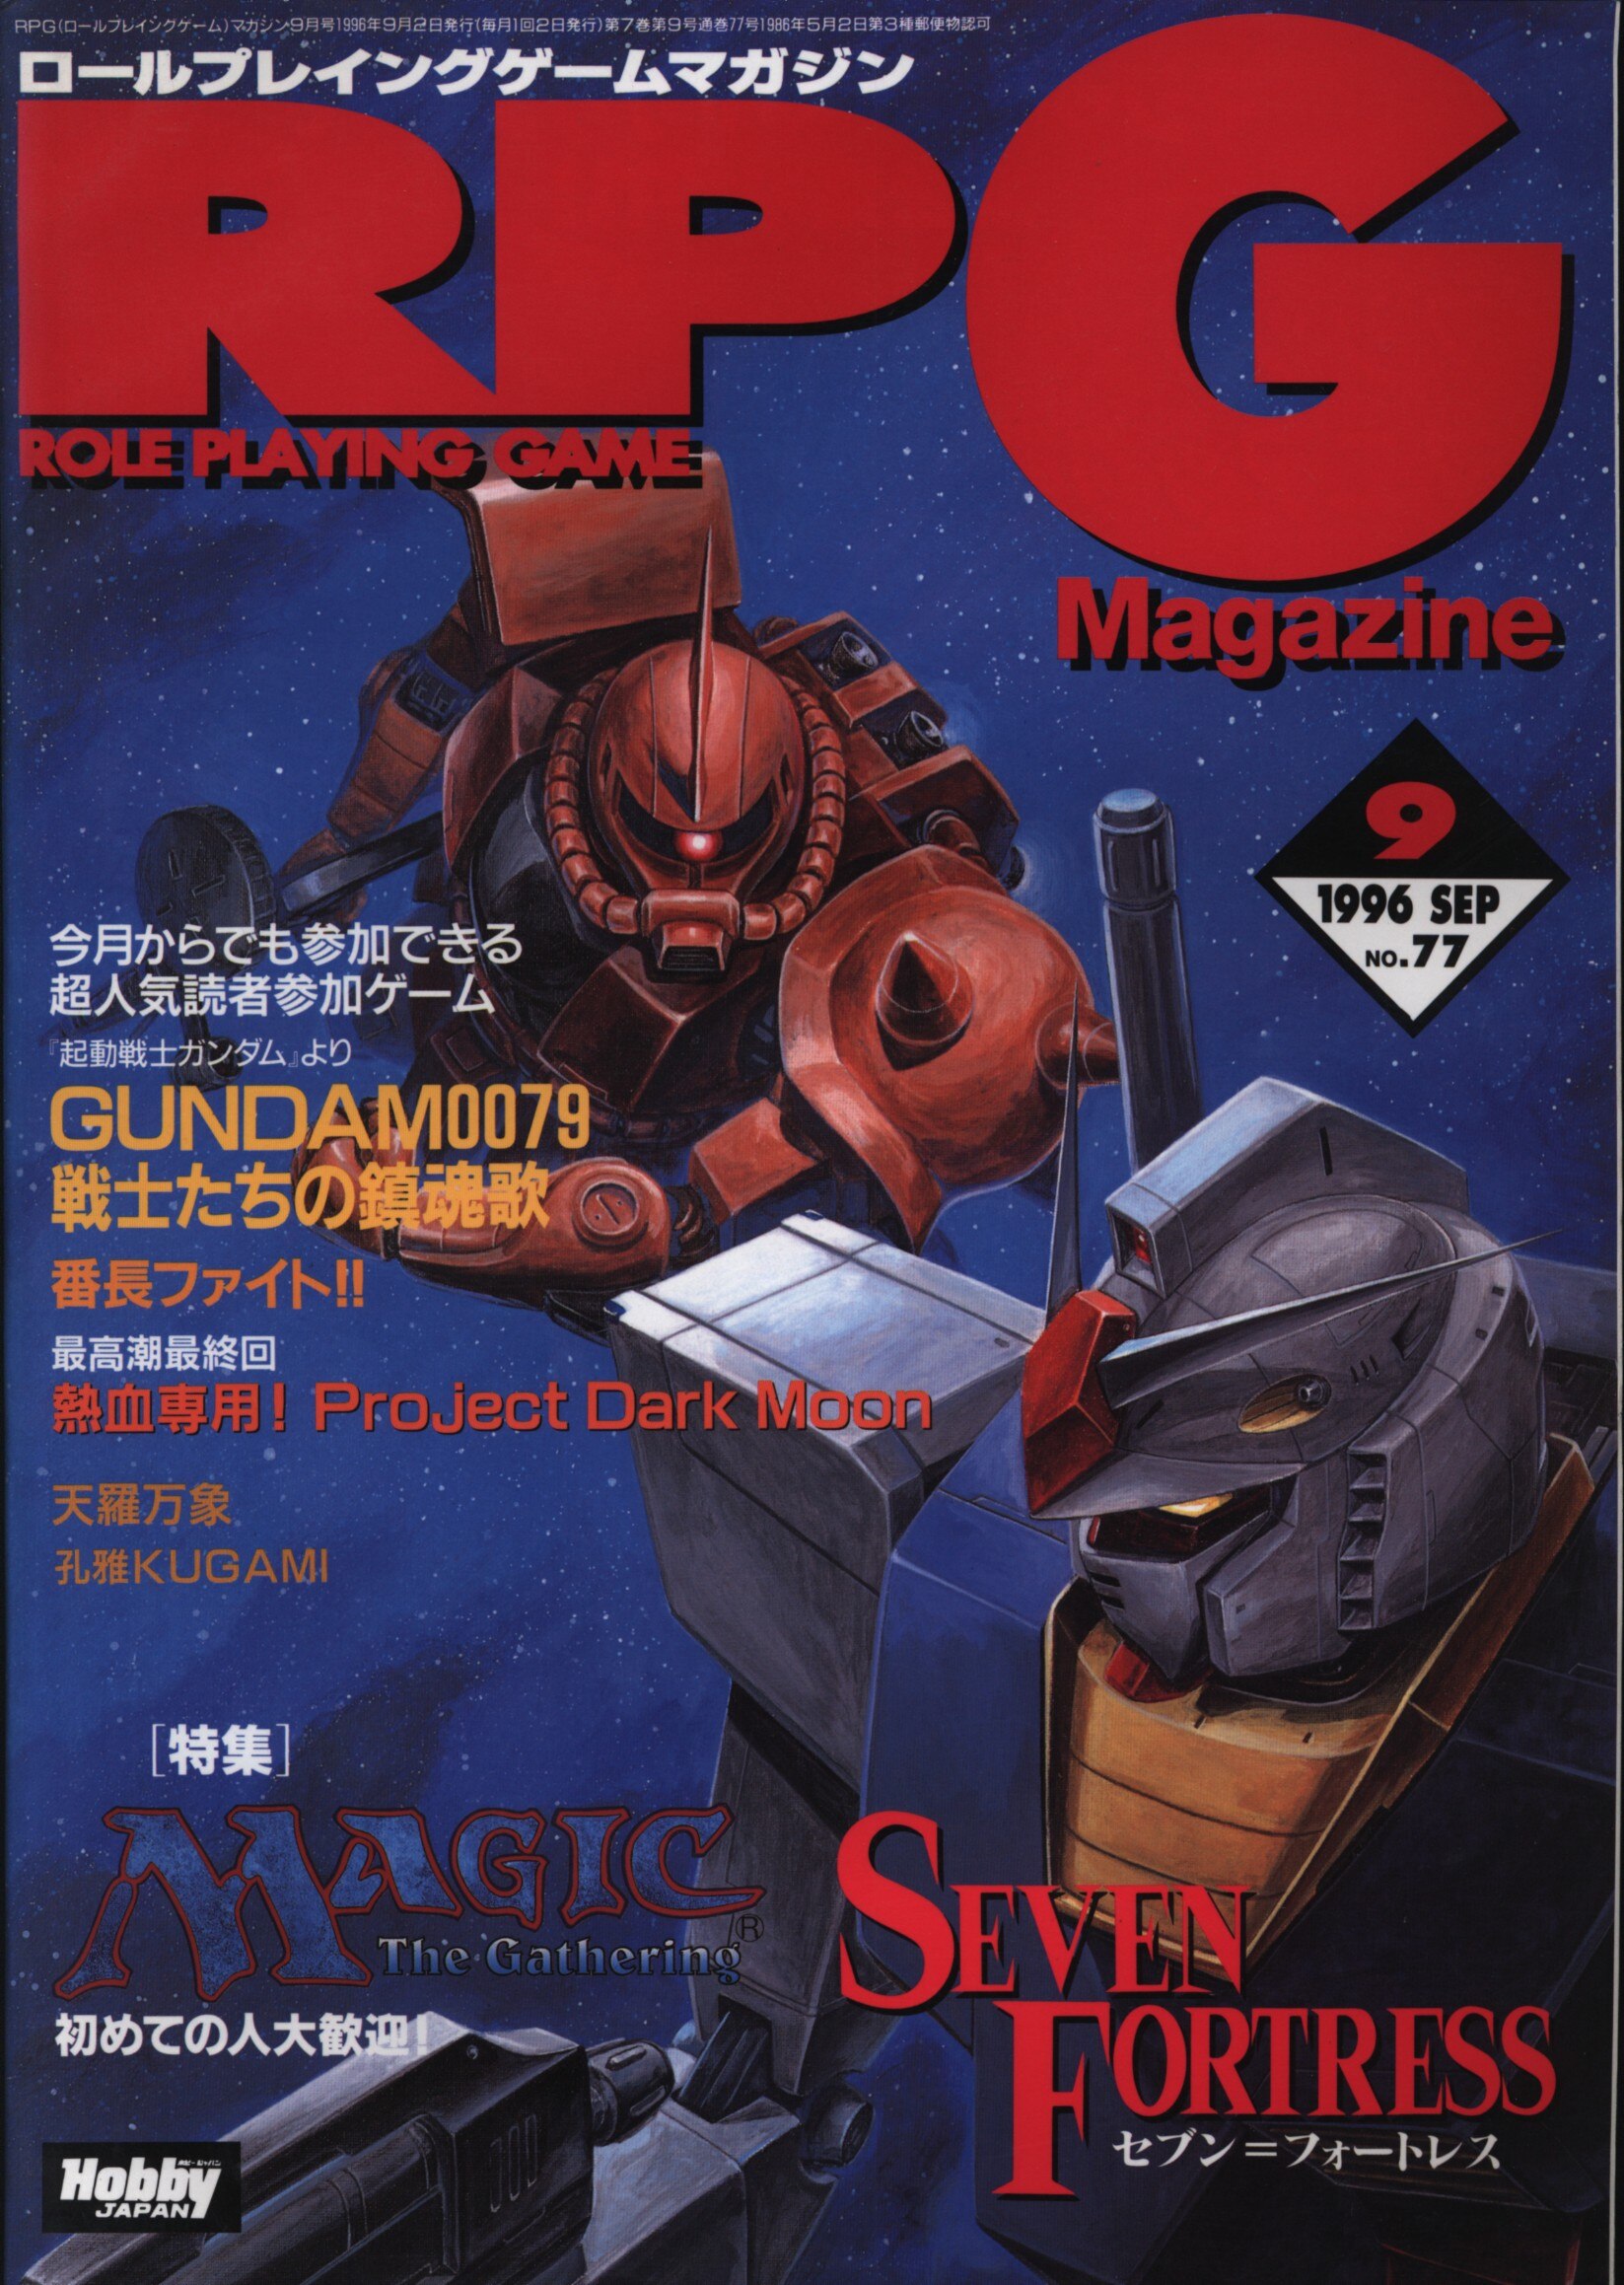 japanese-collectors-list/rpg-magazine/gallery.md at master